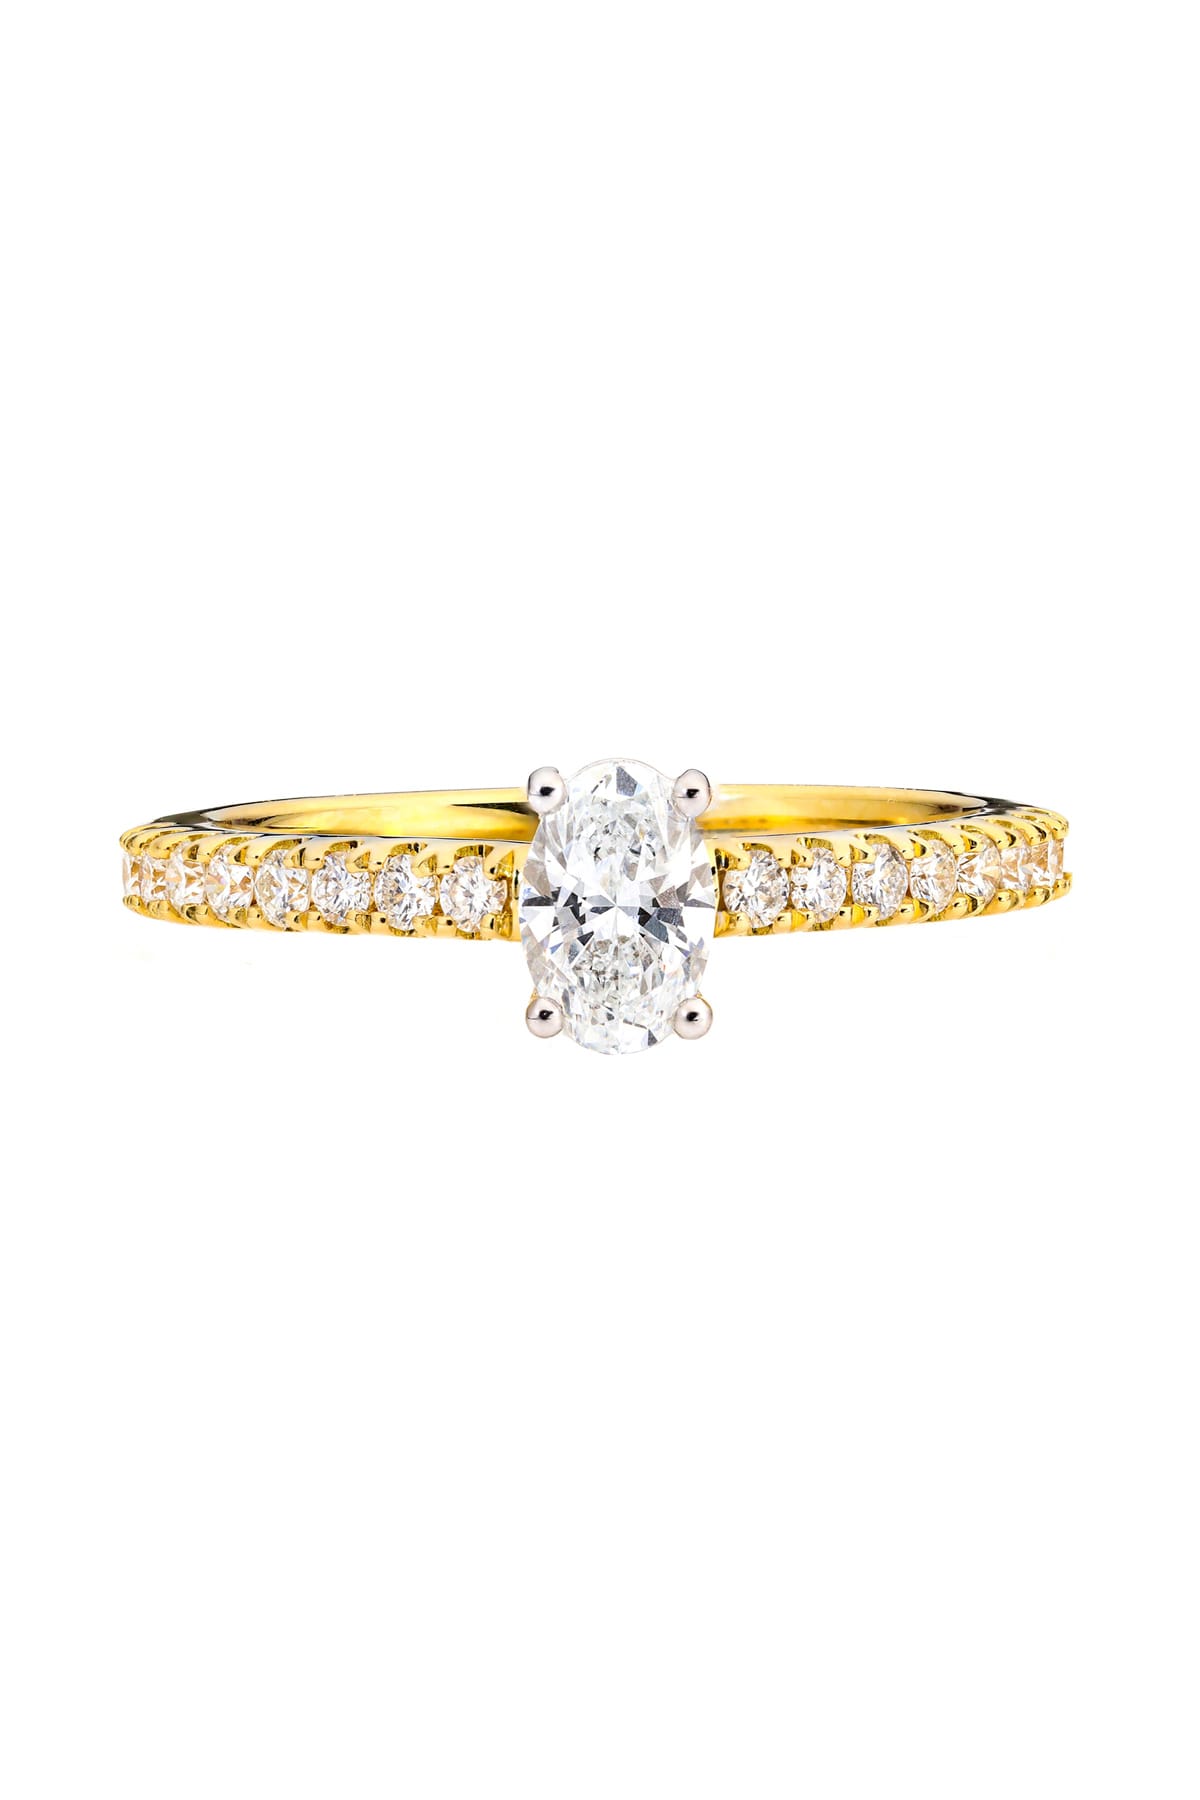 18 Carat Gold 0.50ct Oval Diamond Engagement Ring with Diamond Band available at LeGassick Diamonds and Jewellery Gold Coast, Australia.